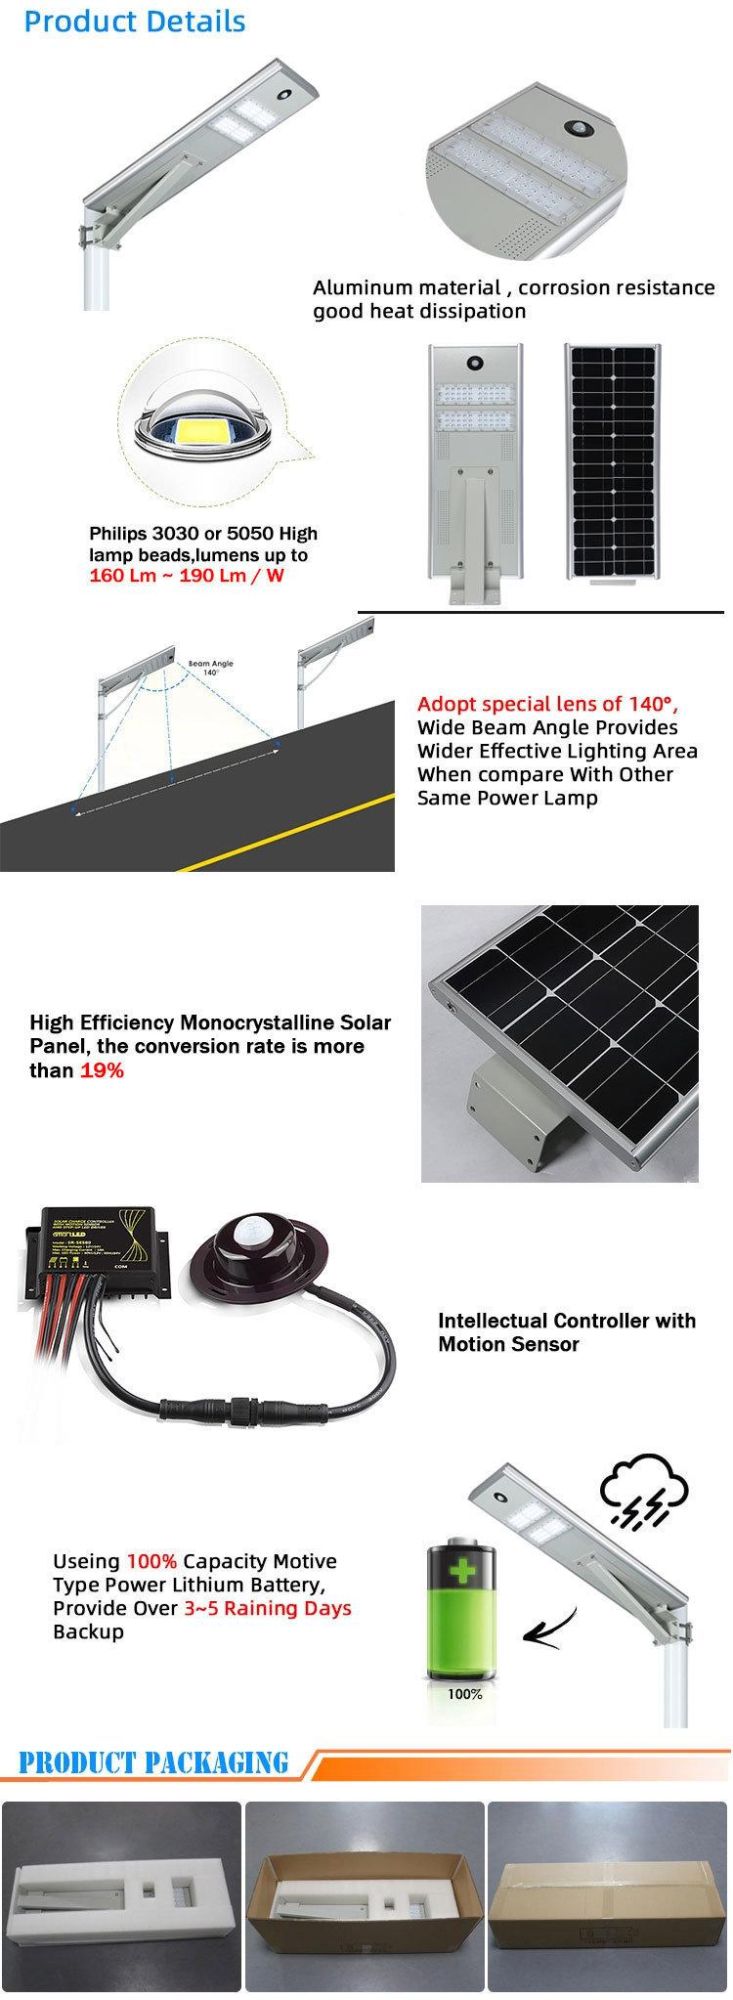 High Quality 40W All in One Solar Outdoor Street Light